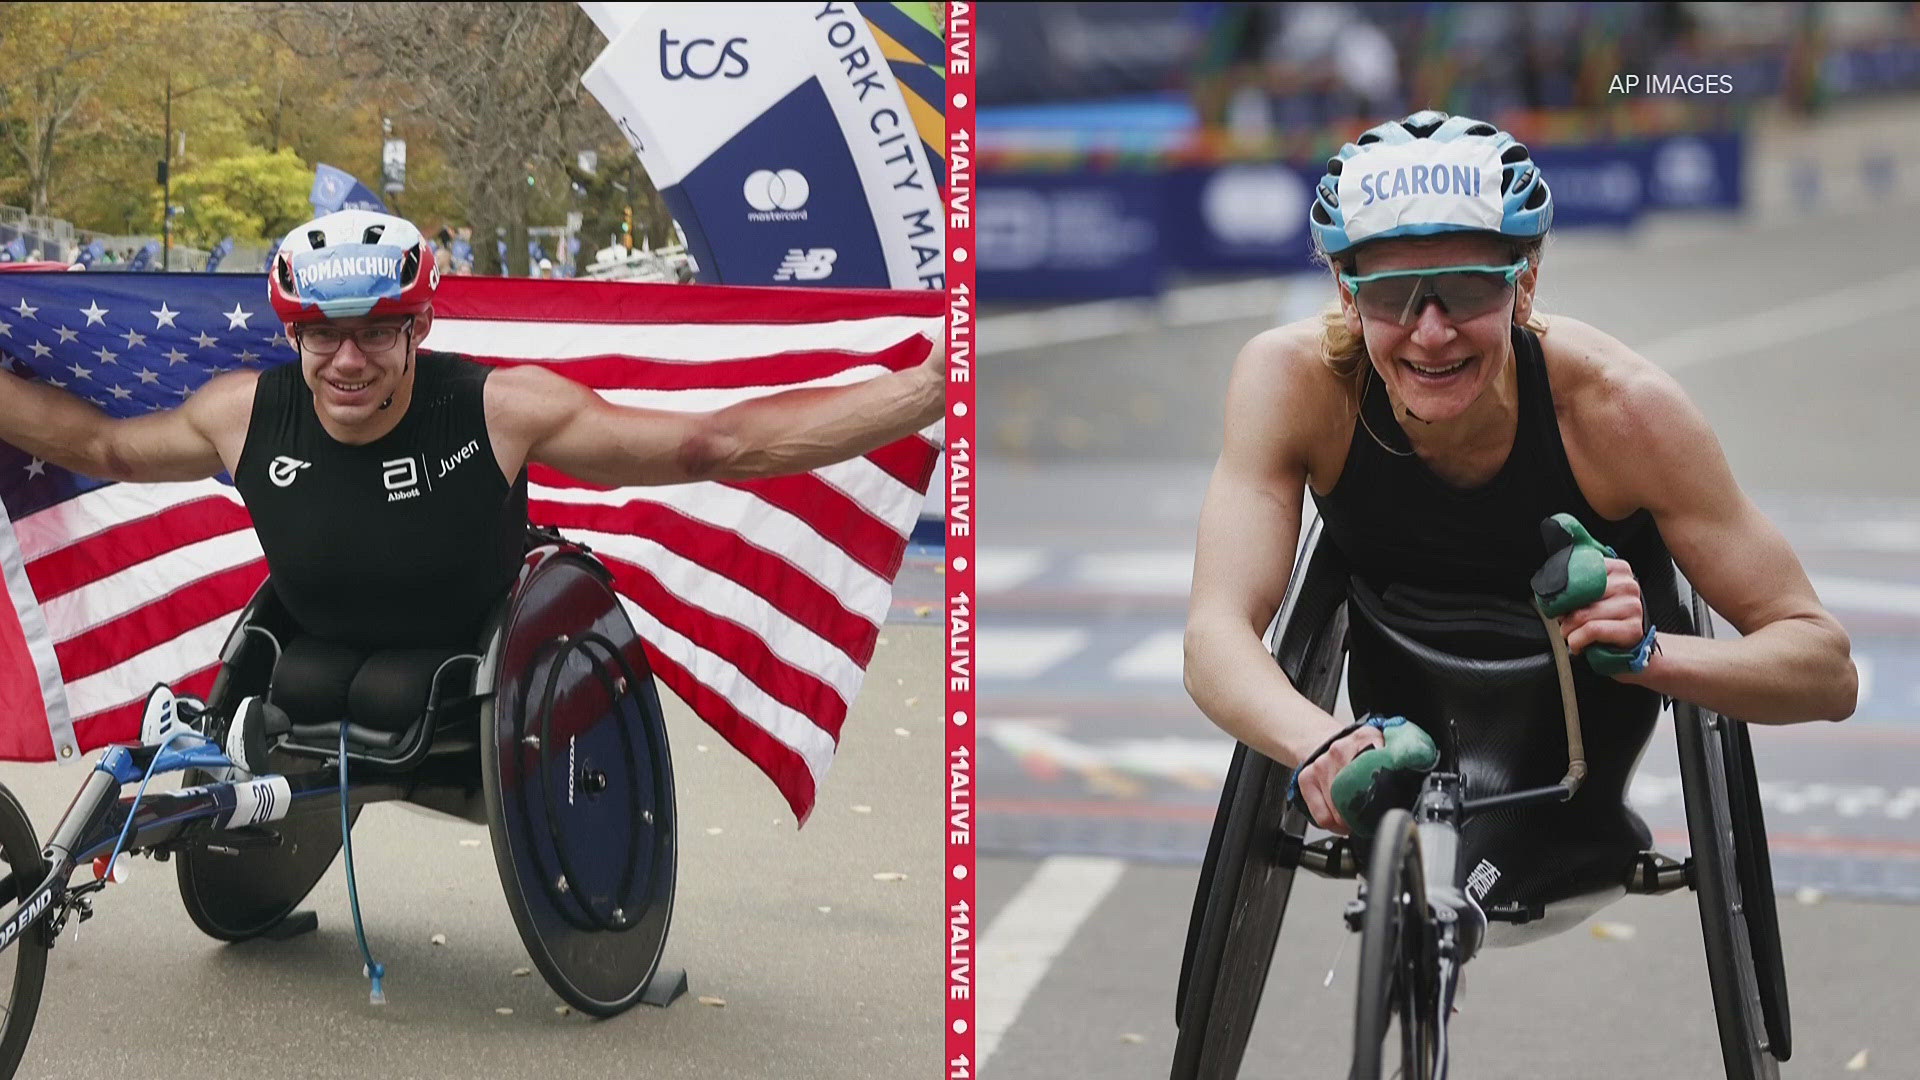 Several Paralympic athletes who competed in the AJC Peachtree Road Race qualified to compete in Paris.